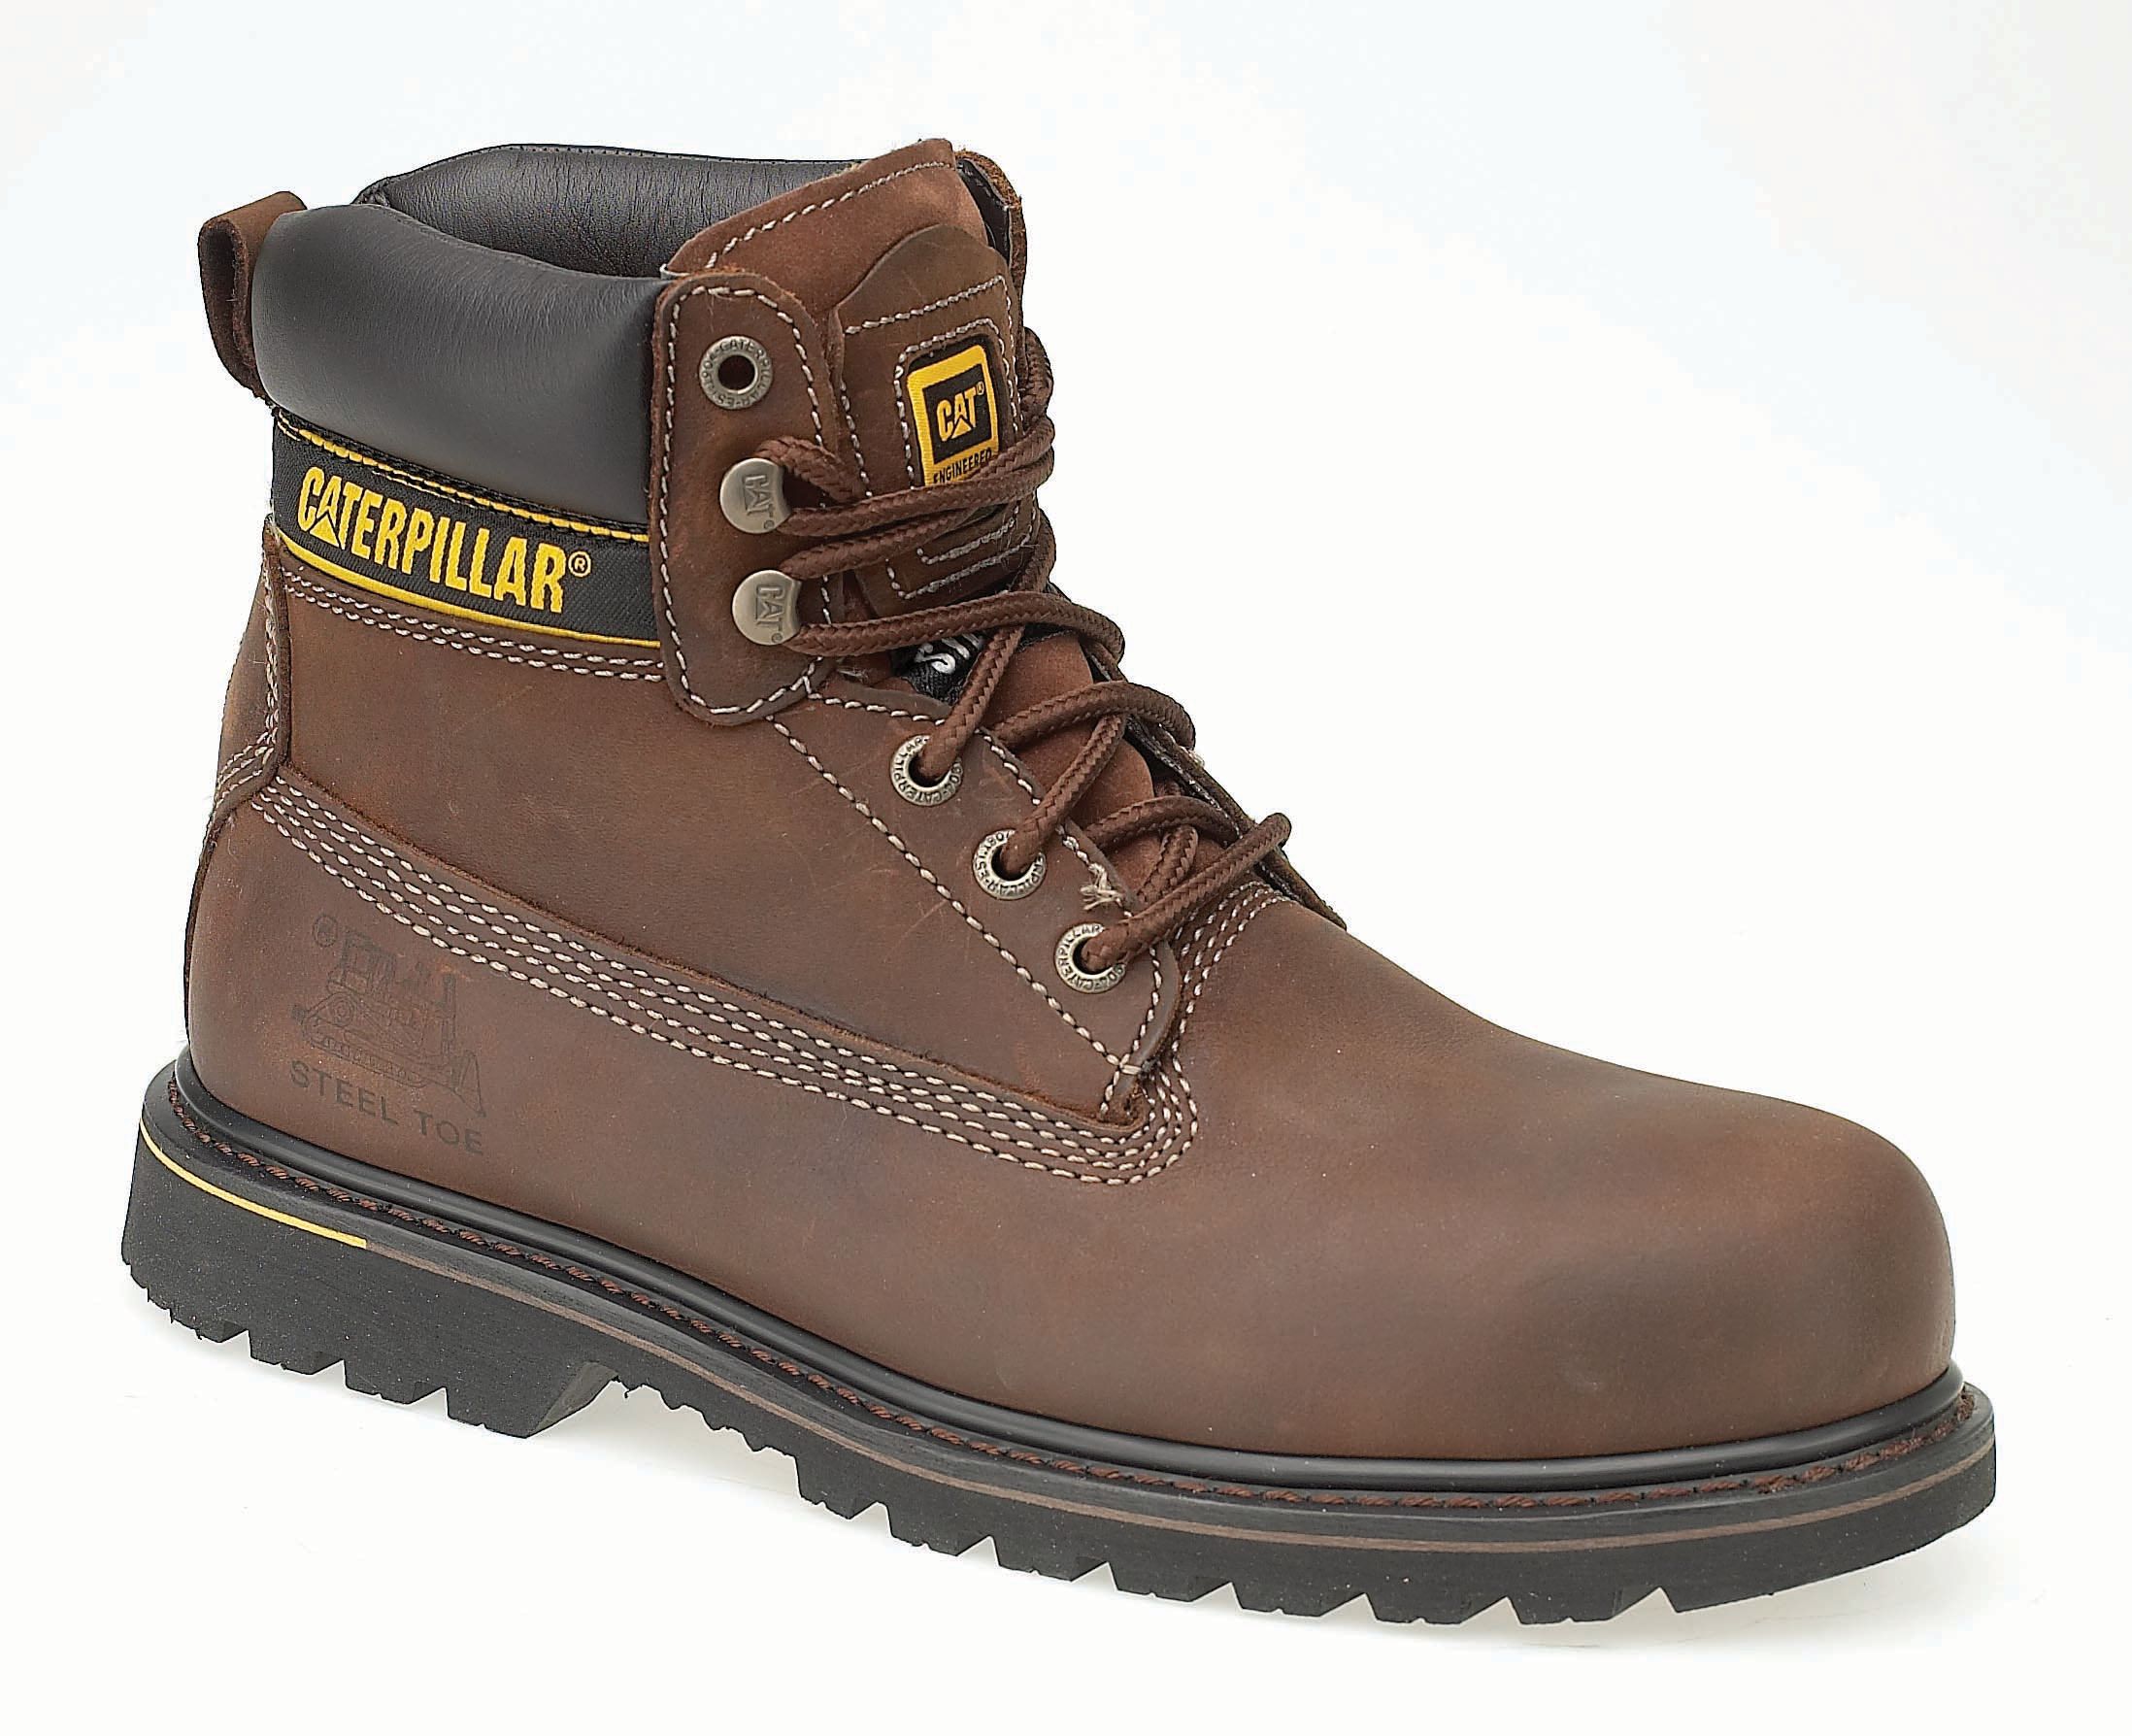 Image of Caterpillar CAT Holton SB Safety Boot - Brown Size 6